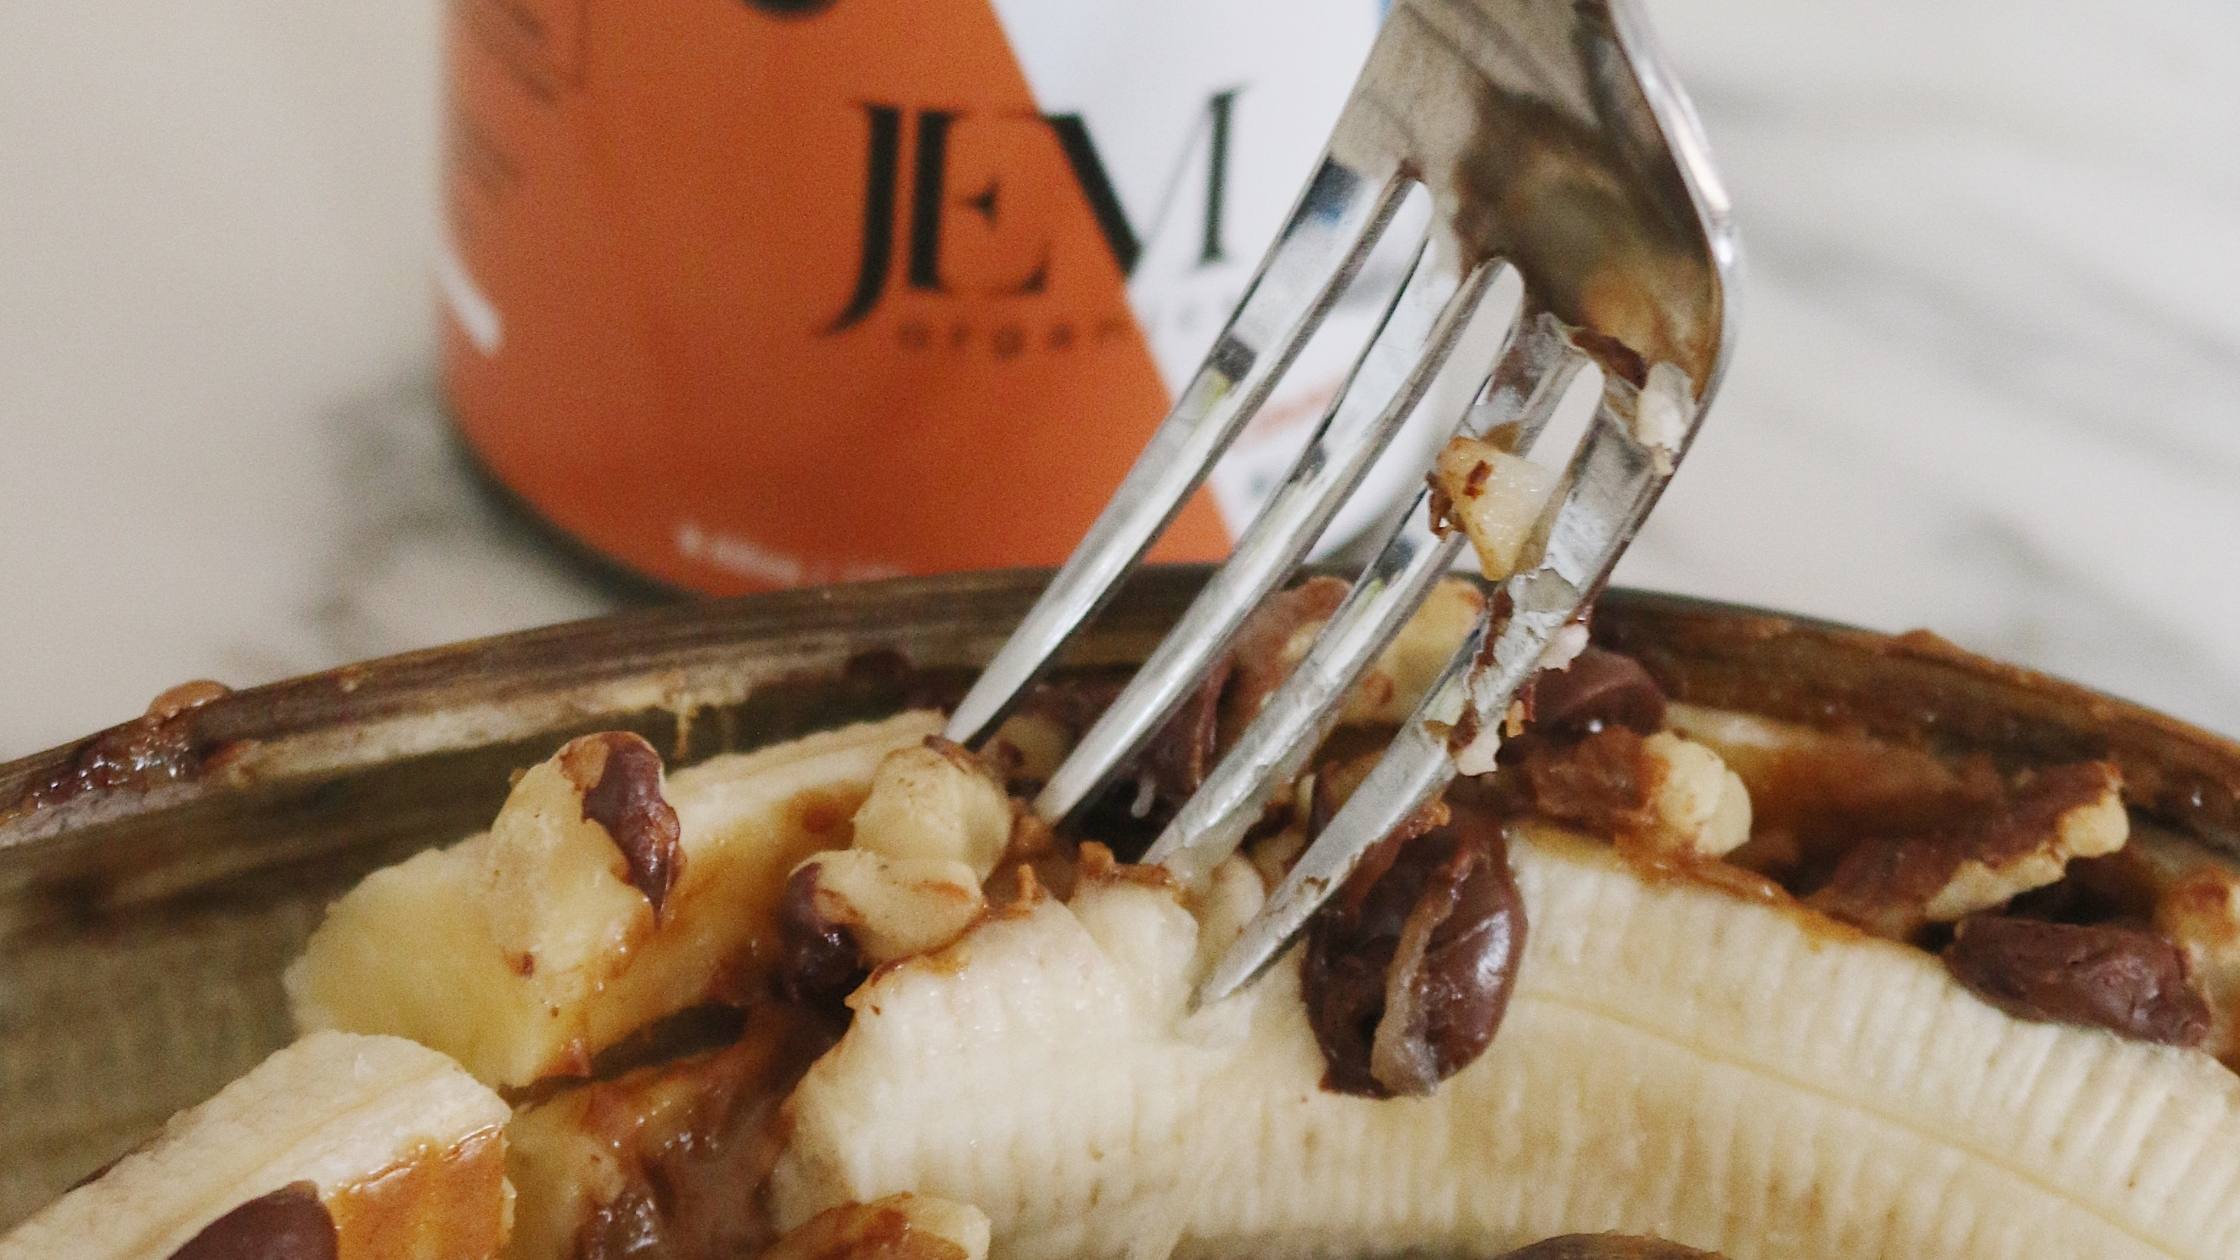 Fork digging into a stuffed banana with chocolate chips, nut butter and walnuts